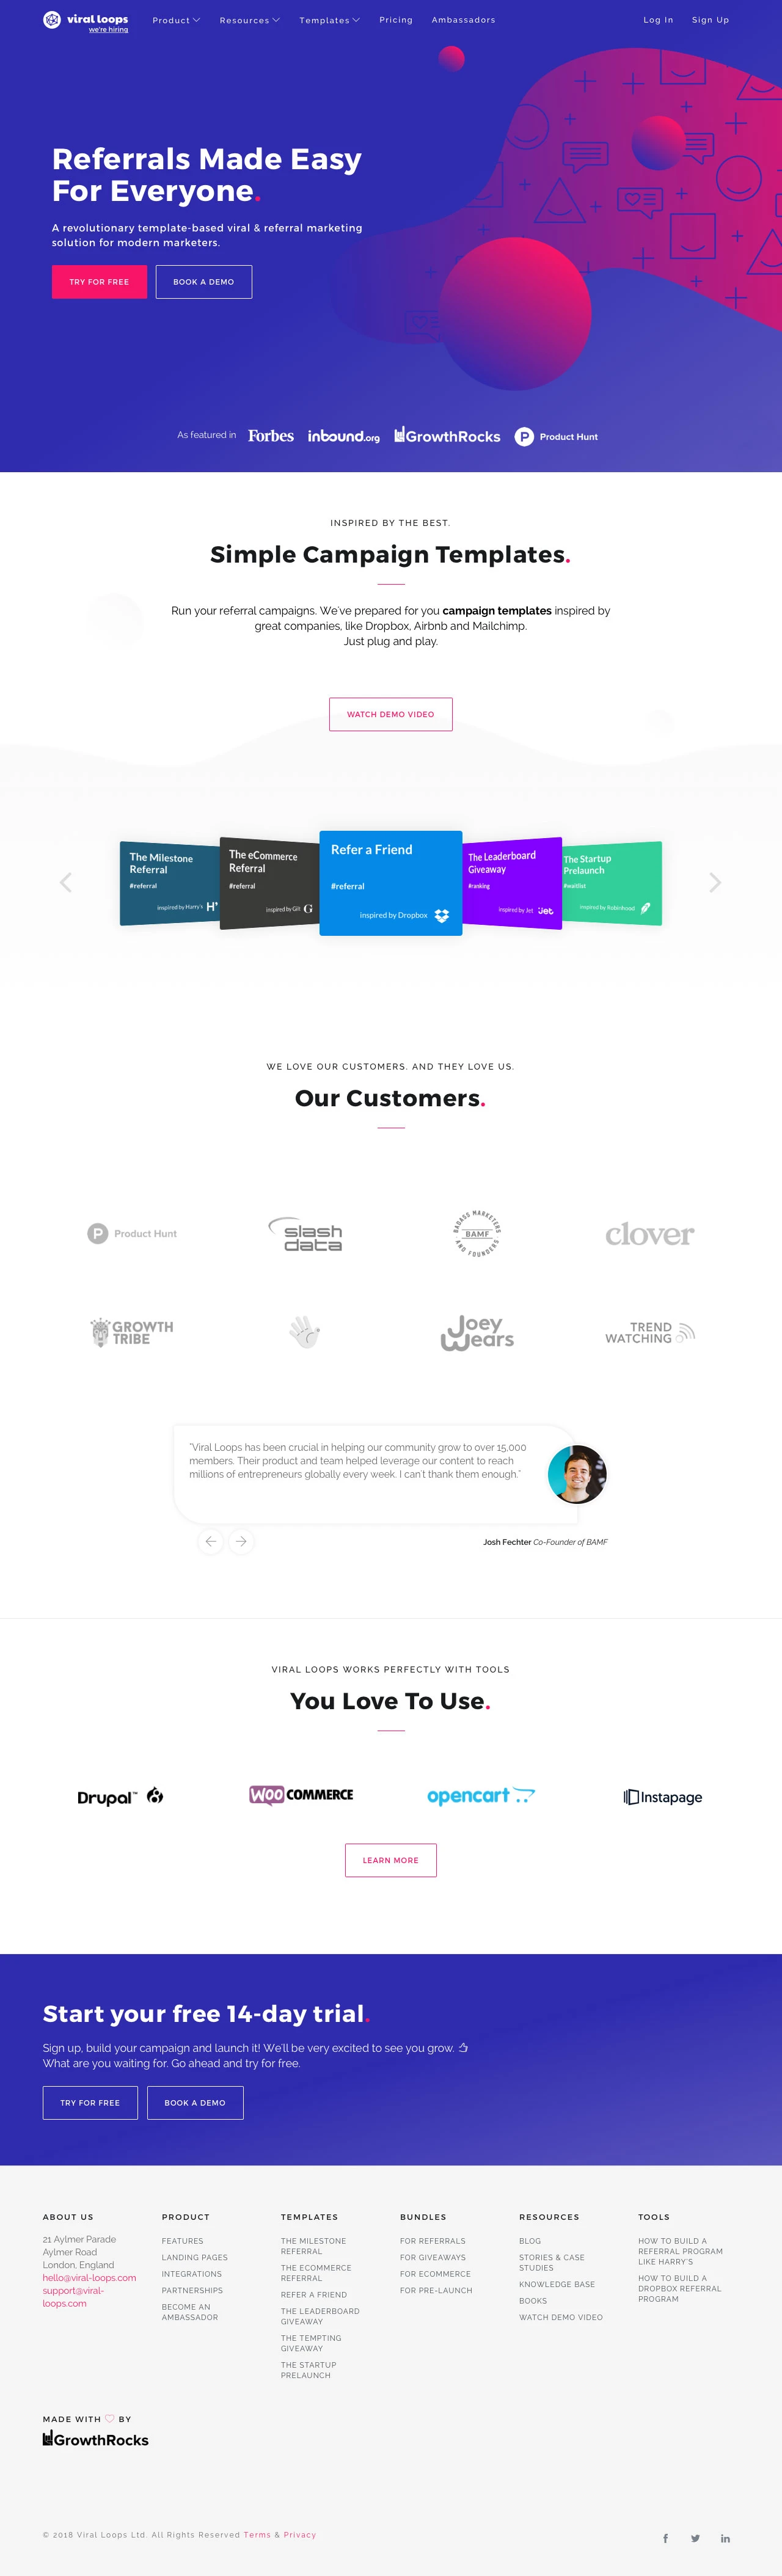 Viral Loops Landing Page Example: Viral Loops is a viral and referral marketing platform to launch ranking competitions, sweepstakes, pre-launch and referral programs.